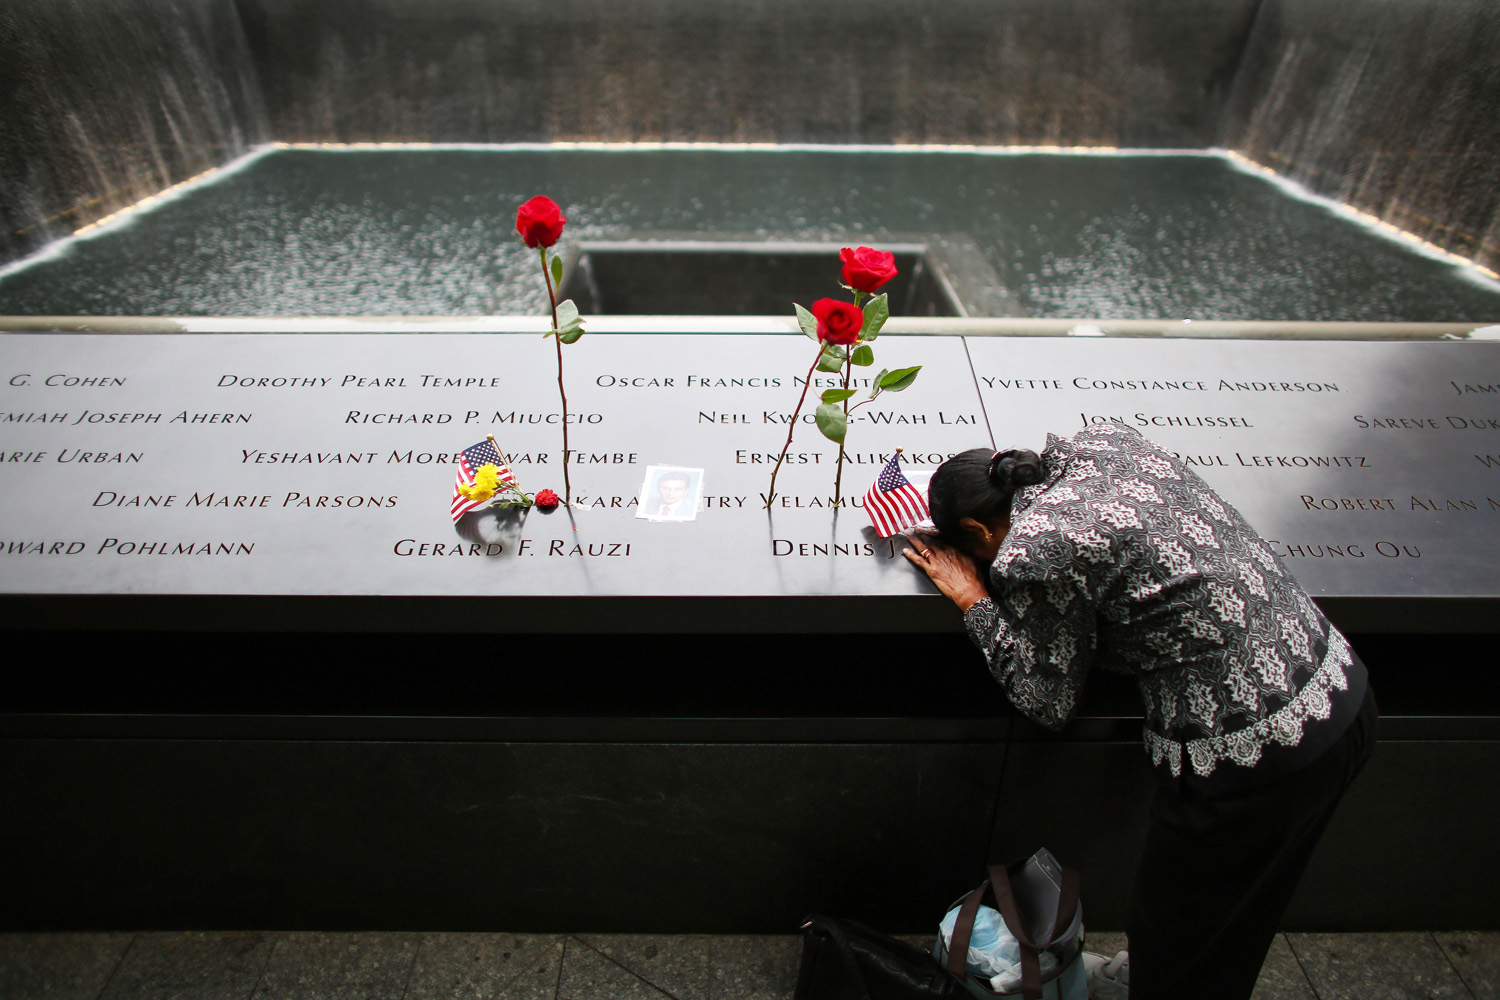 Sept. 11, 2014. A woman grieves at her husband's memorial at South Tower Reflecting Pool before the memorial observances held at the site of the World Trade Center before memorial observances are held at the site of the World Trade Center in New York City. This year marks the 13th anniversary of the September 11th terrorist attacks that killed nearly 3,000 people at the World Trade Center, Pentagon and on Flight 93.